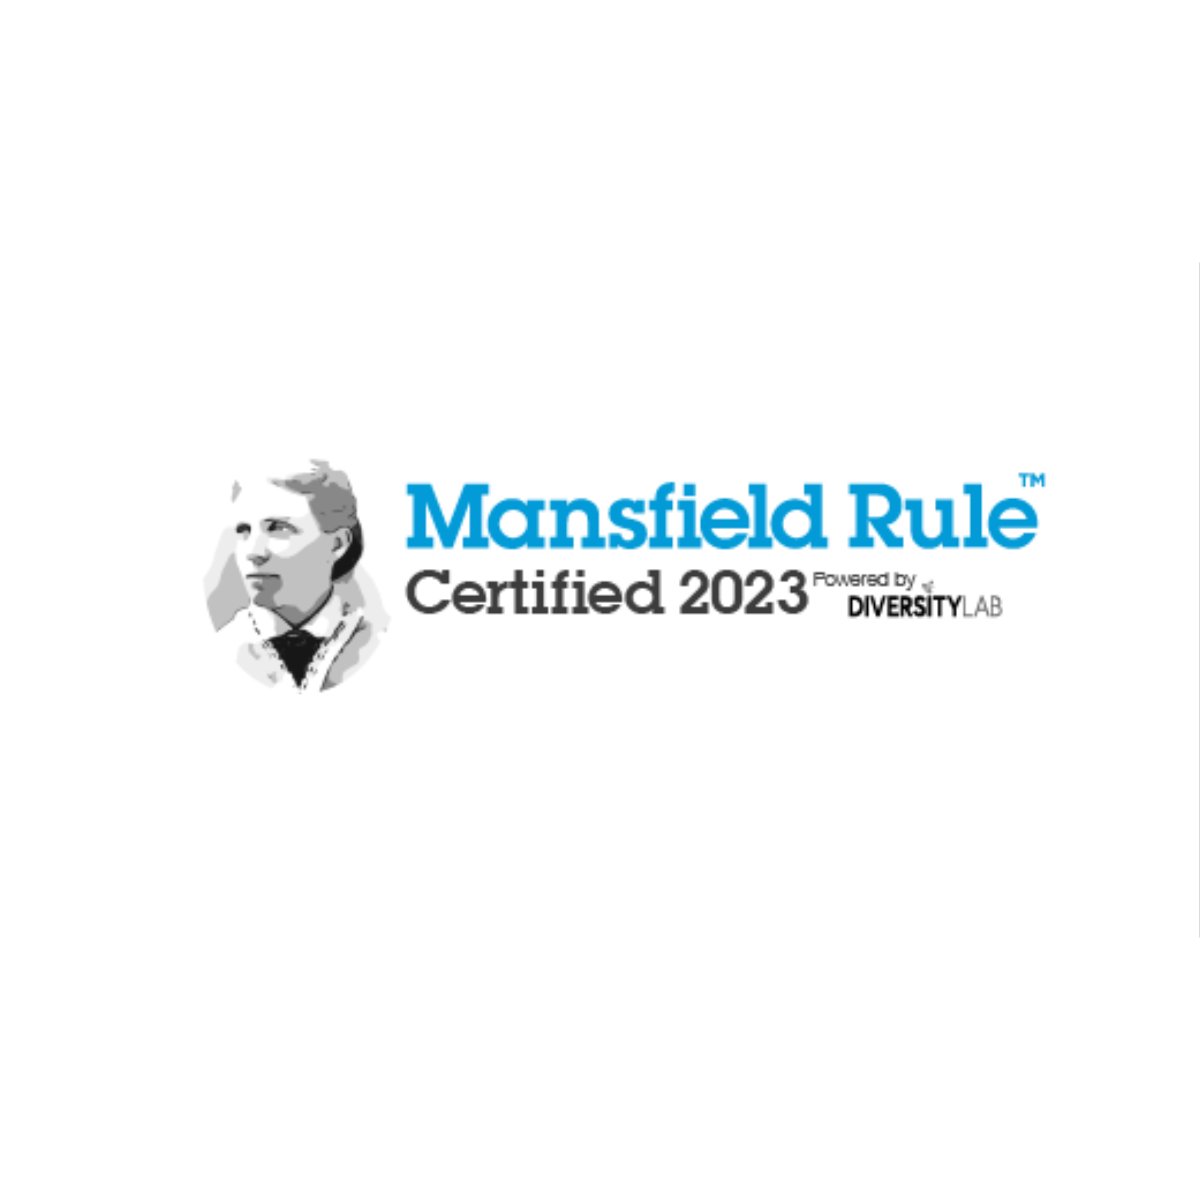 Higgs Fletcher & Mack is proud to announce that we have achieved Mansfield Certification. Learn more about the process in this press release from Diversity Labs: bit.ly/3MALsUM #MansfieldRule #DiversityLab #MansfieldCertified #Sdlaw